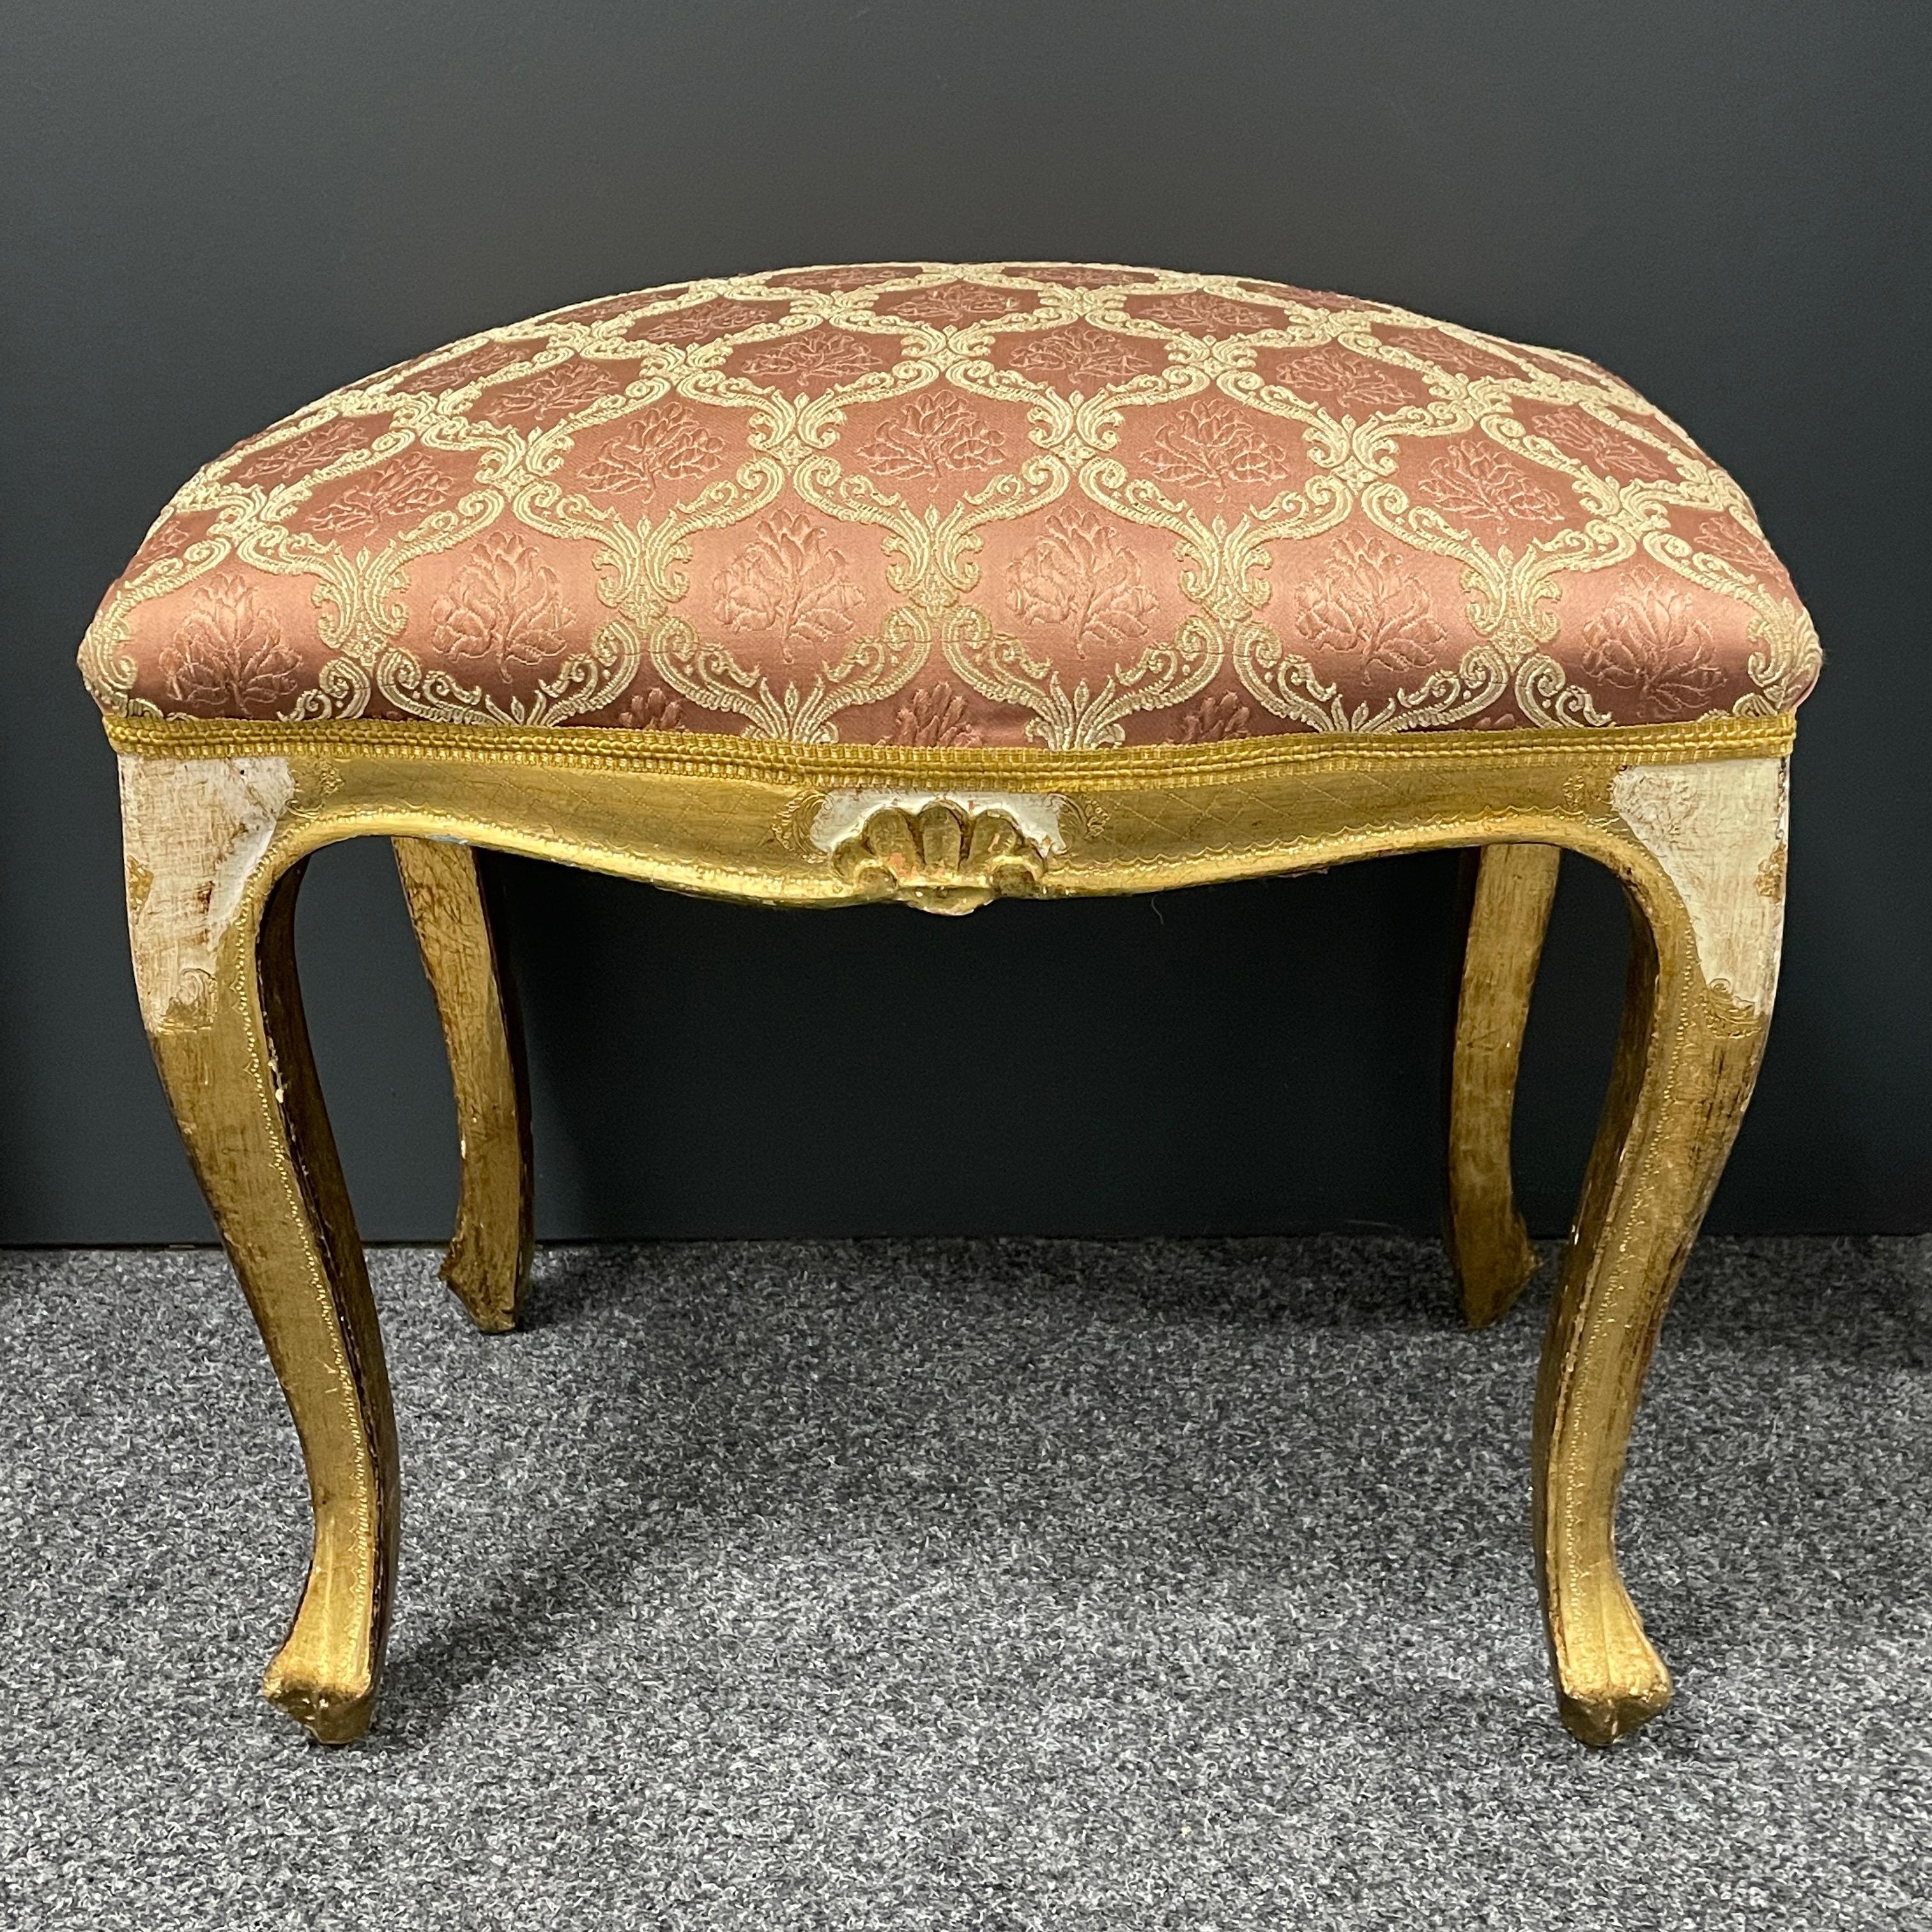 Classic 1930s fabric and gilded wood foot stool. Nice addition to your room, entry hall or vanity room. Made of wood and a high-quality fabric. Found at an estate sale in Nuremberg, Germany.